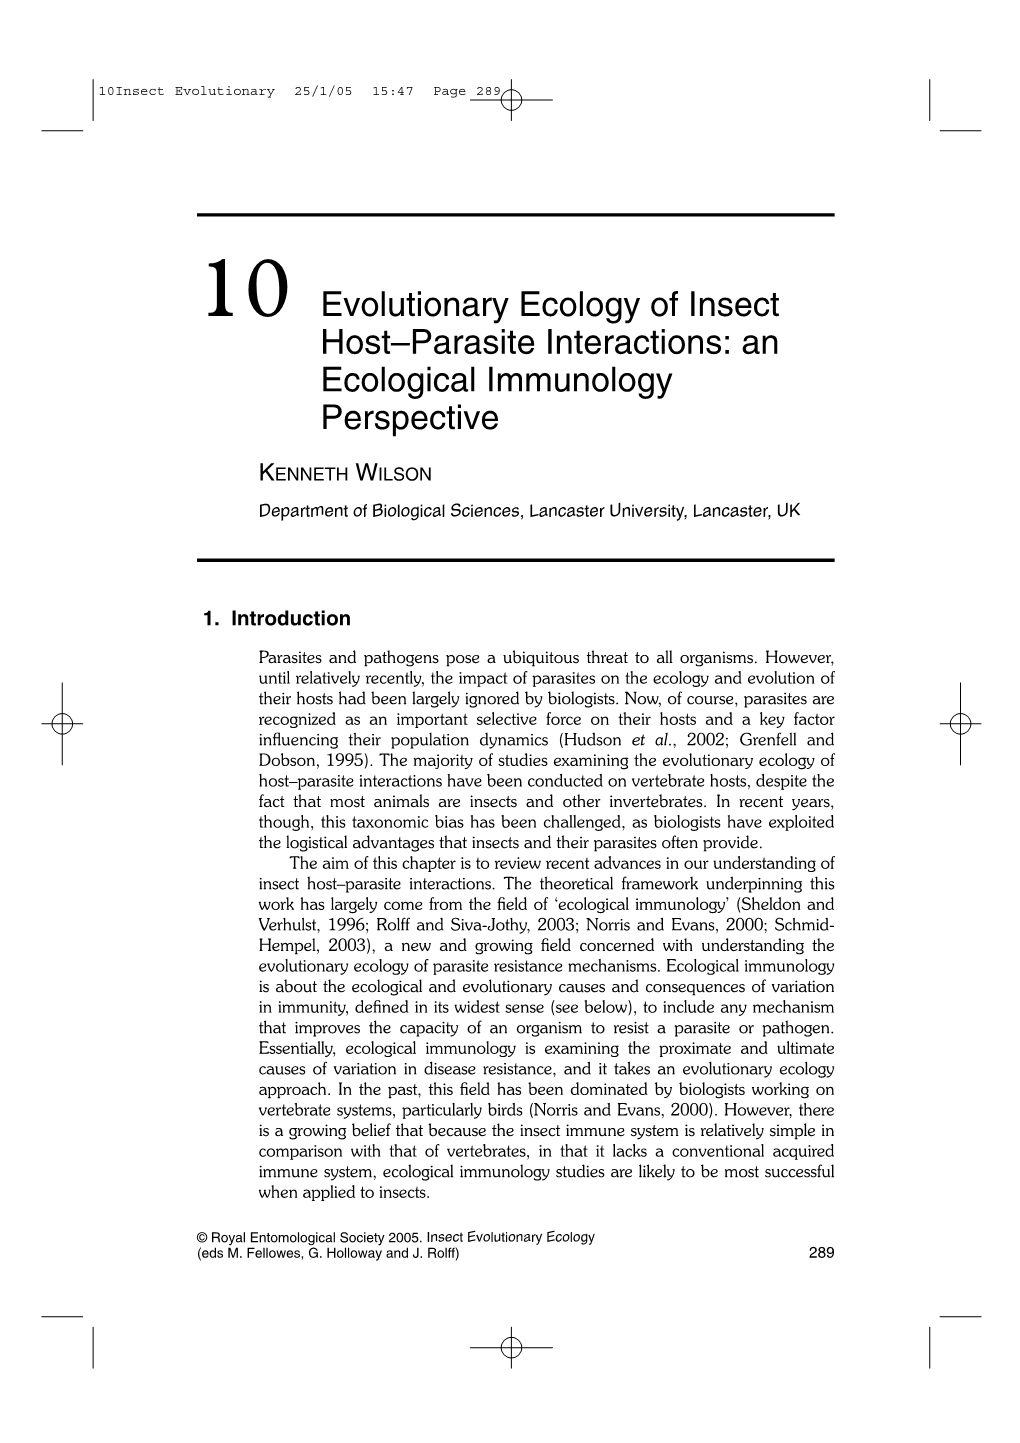 10 Evolutionary Ecology of Insect Host–Parasite Interactions: an Ecological Immunology Perspective